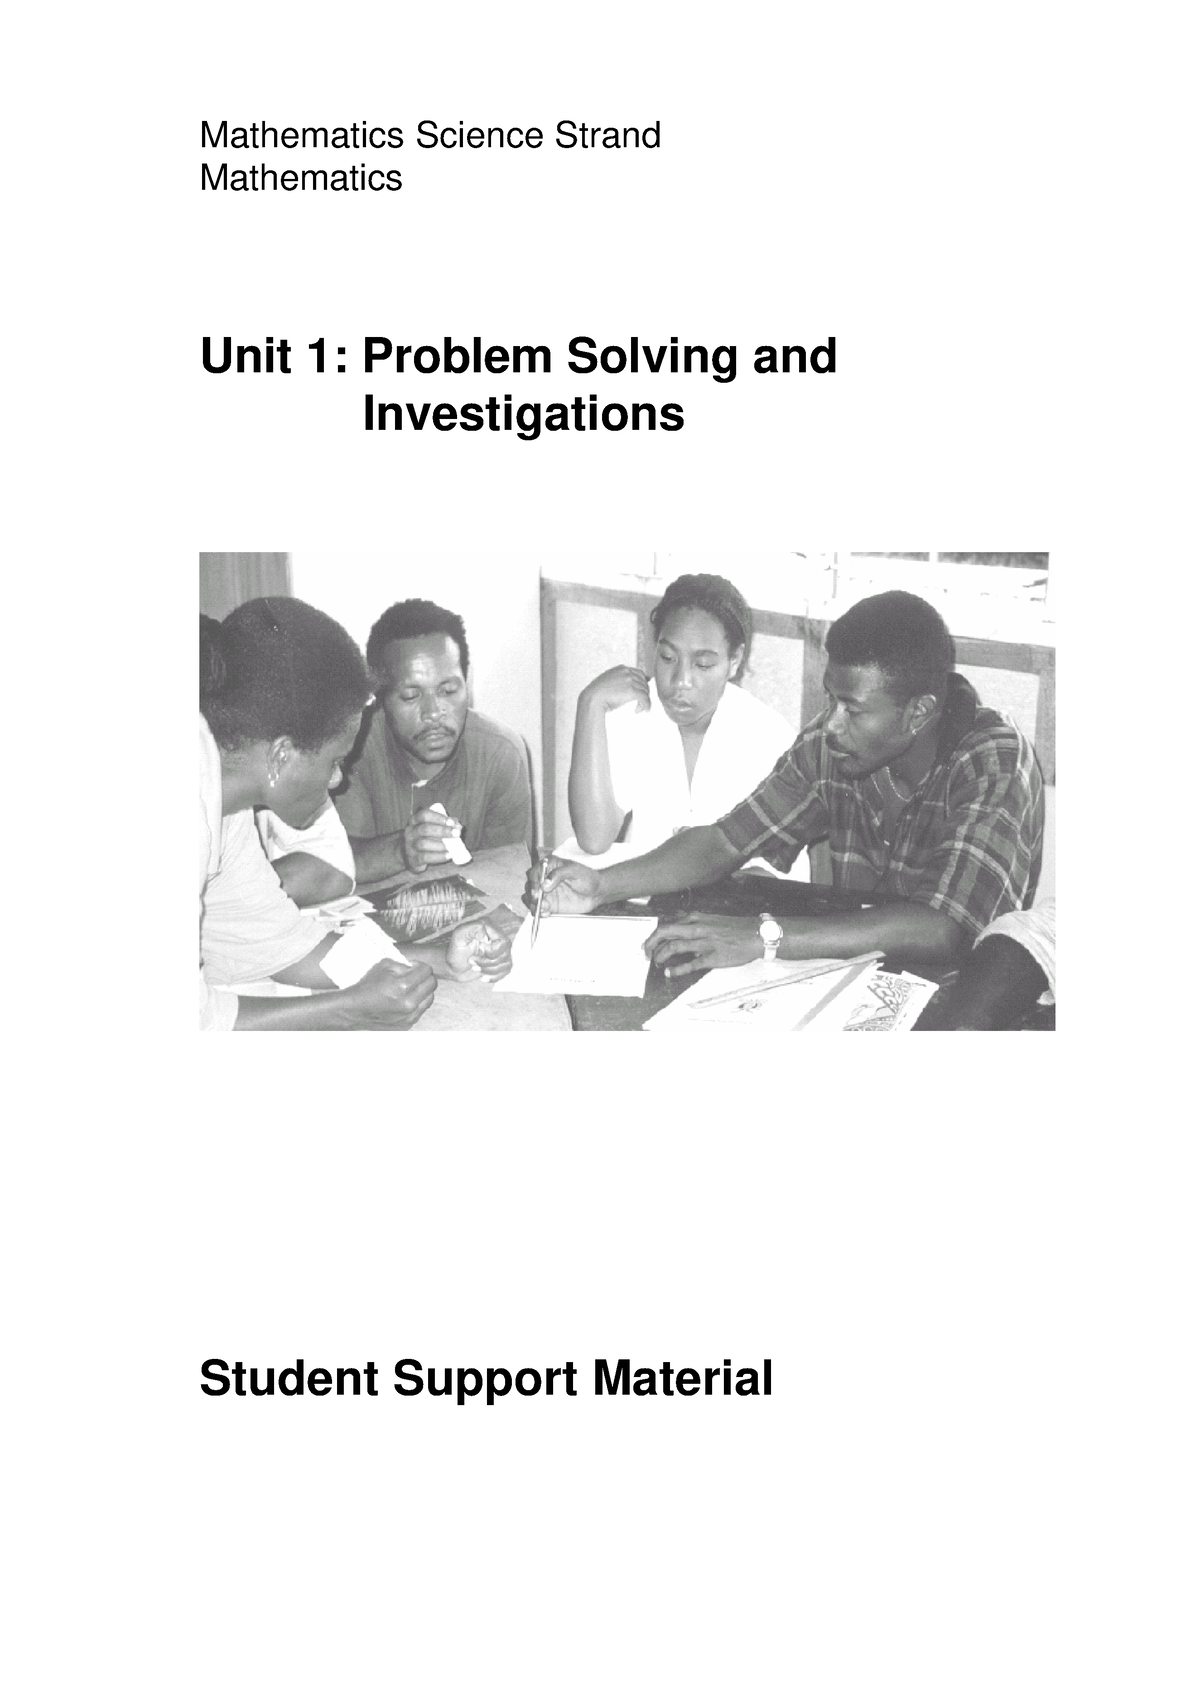 difference between mathematical investigation and problem solving